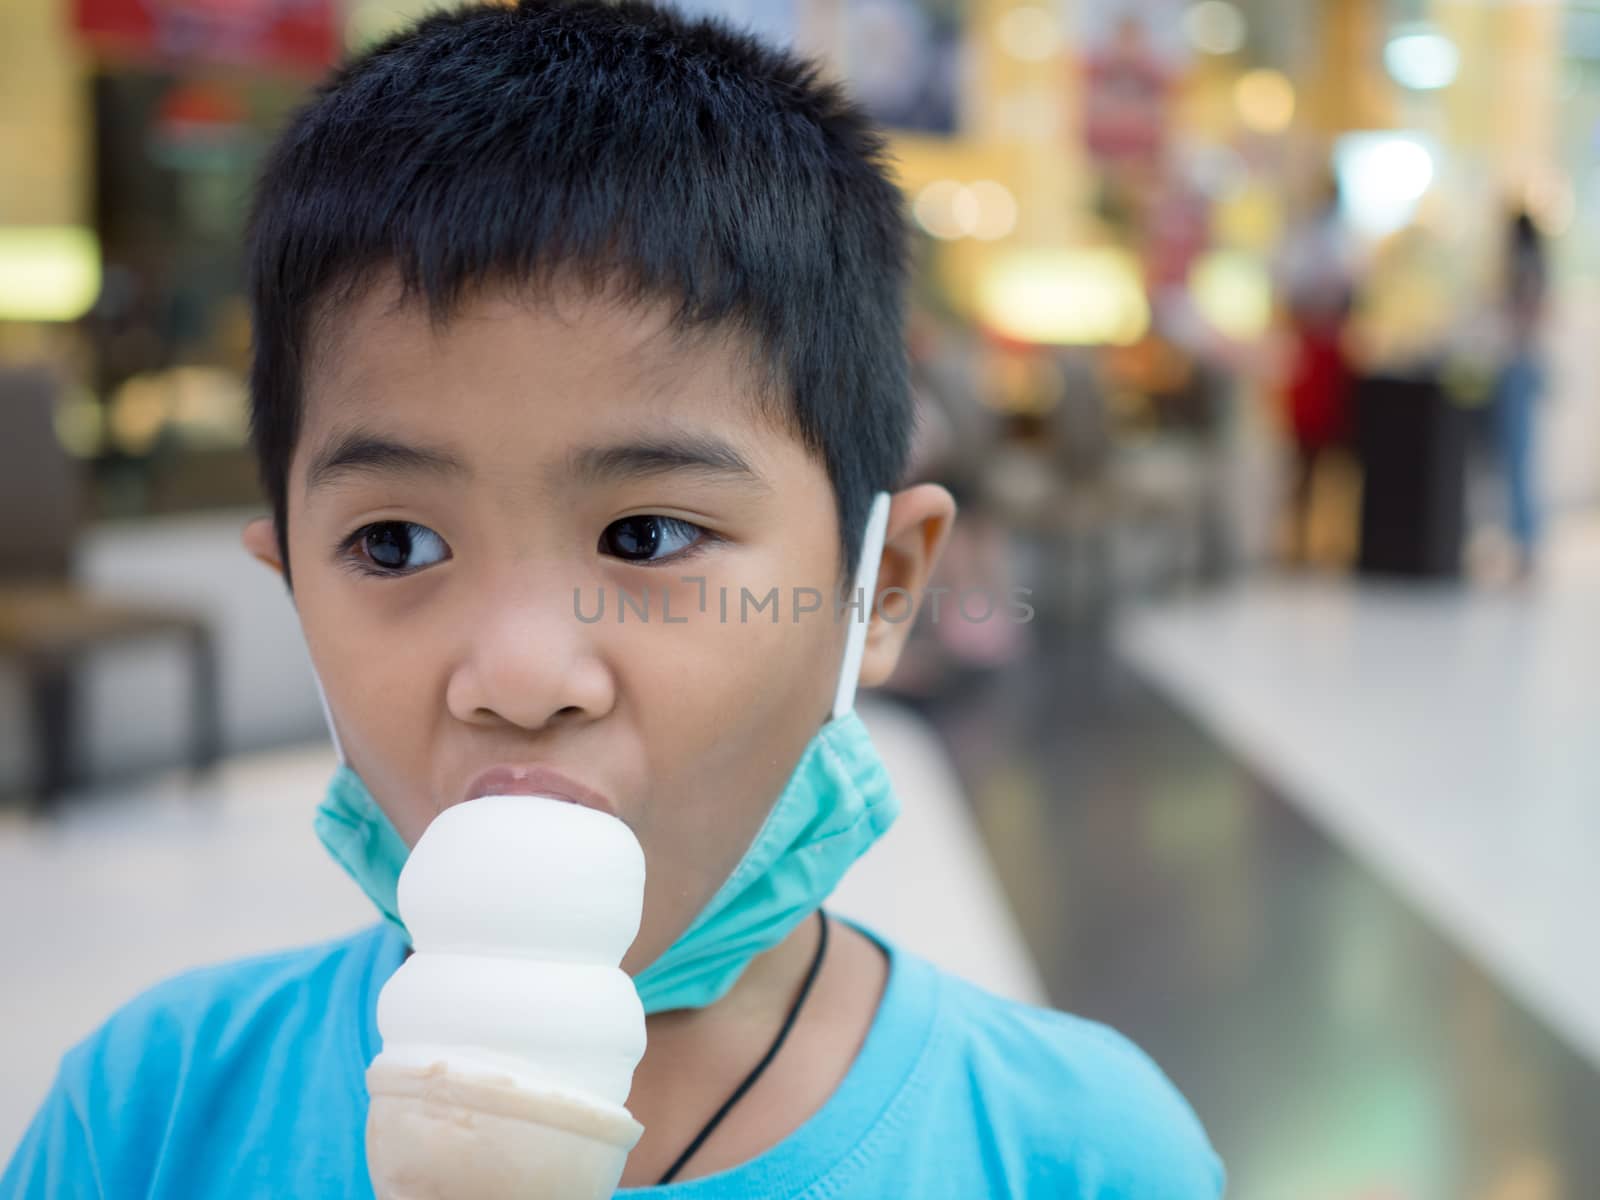 A boy eating ice cream inside a mall with a blurred background. by Unimages2527